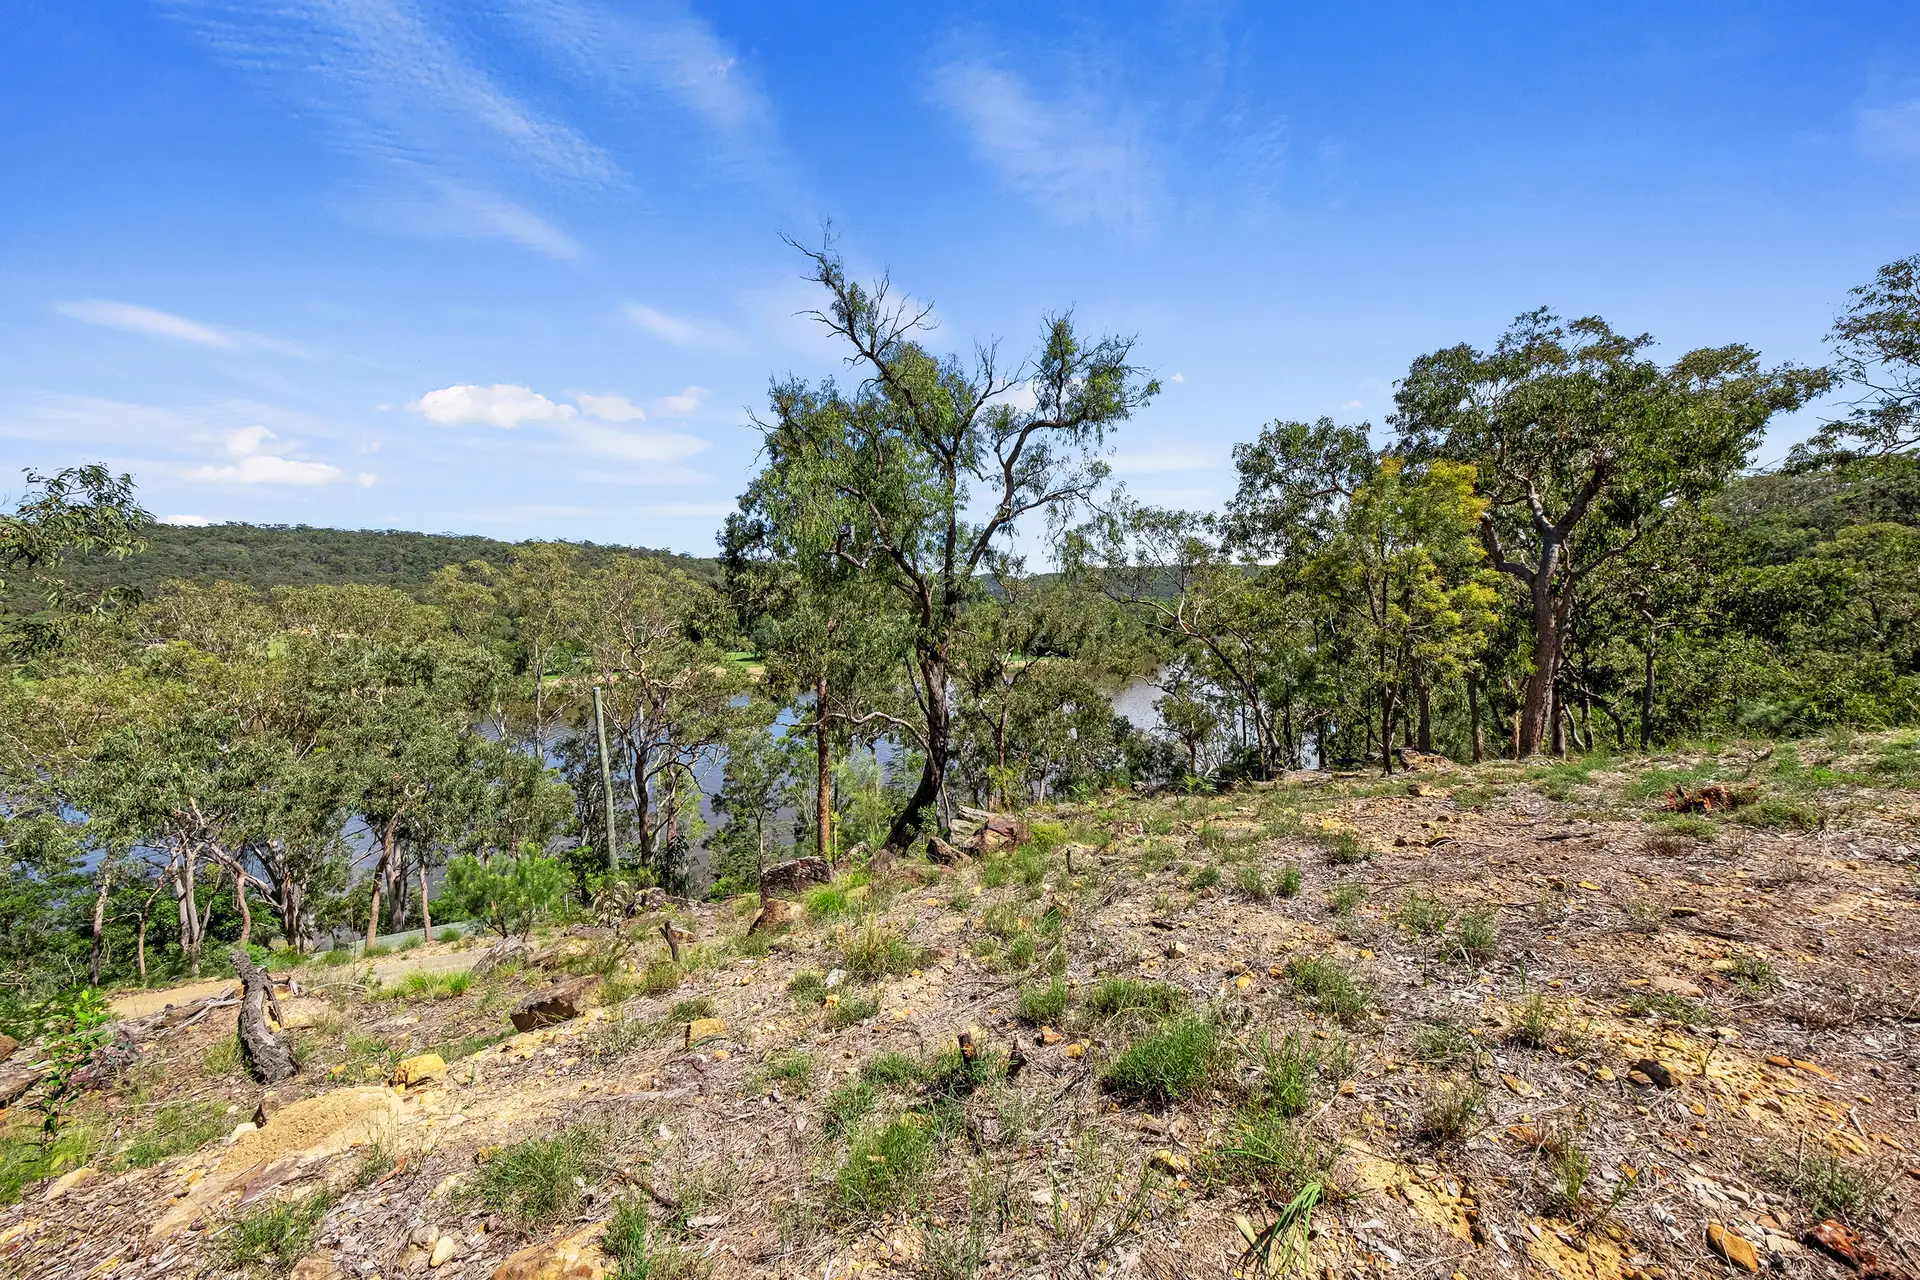 Lot 2, 4 & 5, 641-647 River Road, Lower Portland For Sale by Cutcliffe Properties - image 1